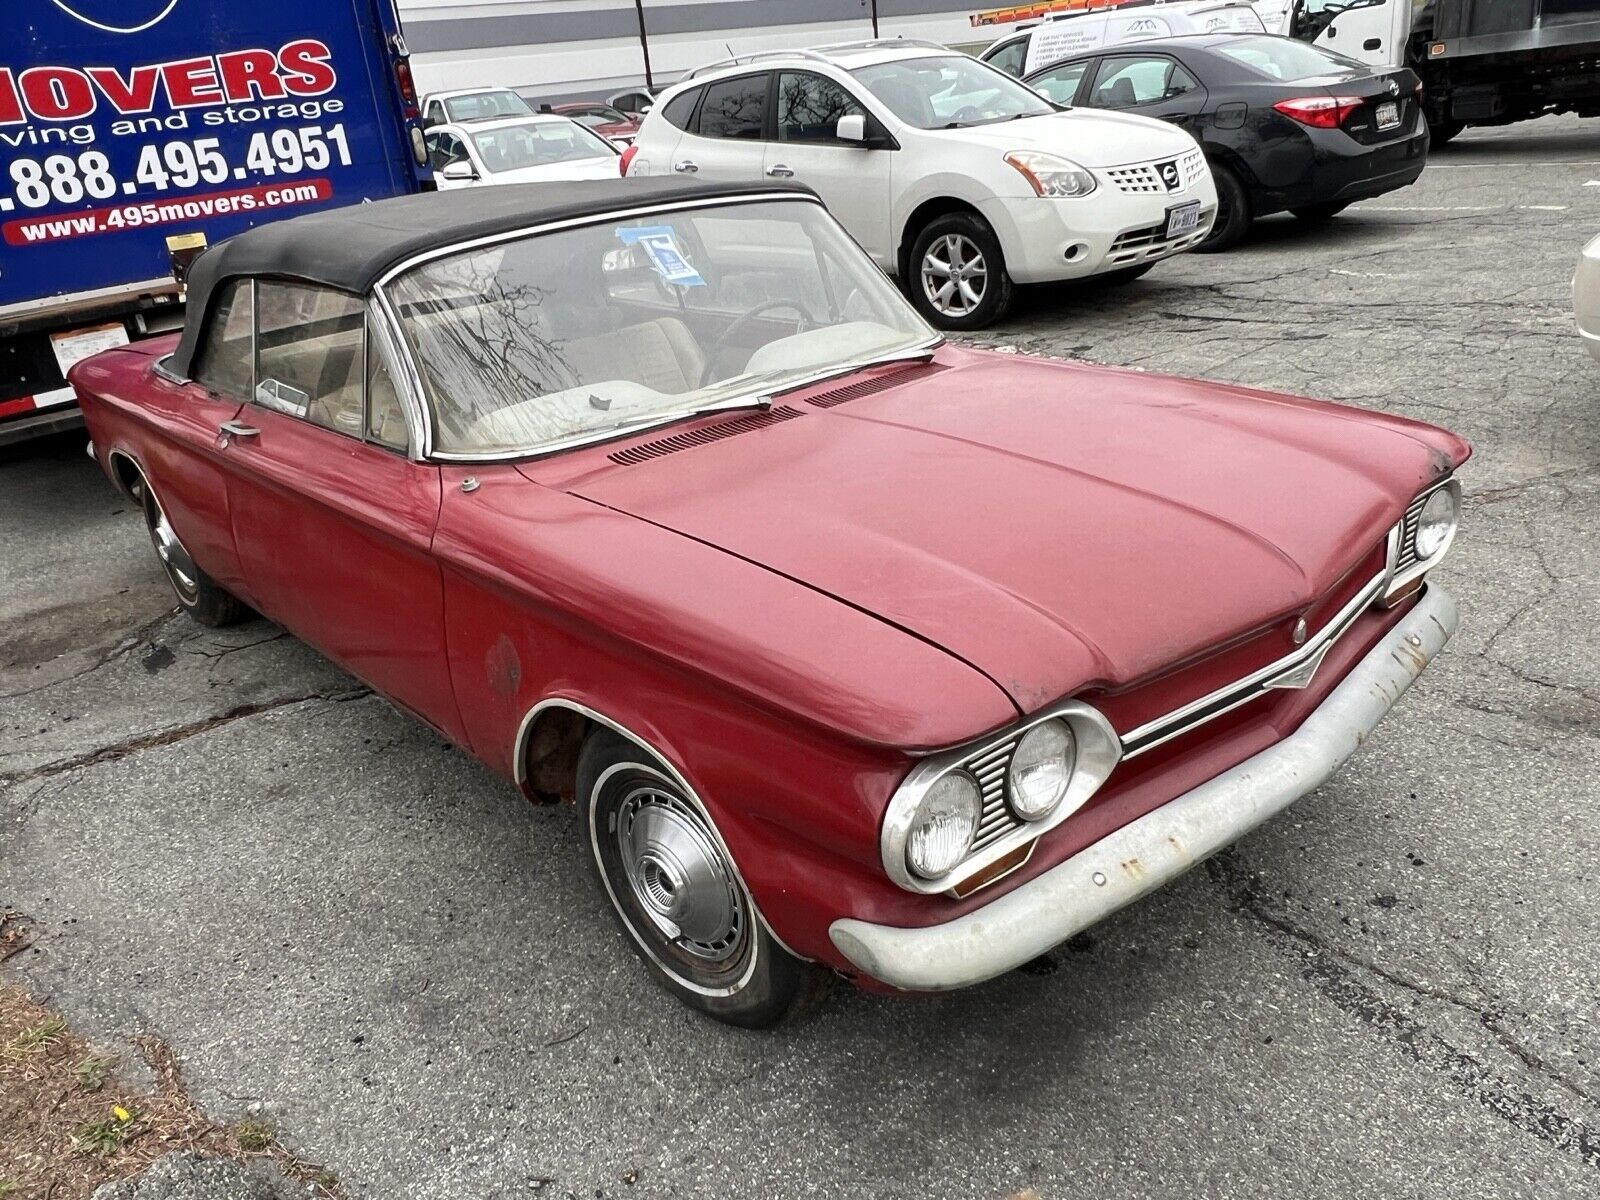 1964 Chevrolet Corvair Turbo 4 Speed Convertible